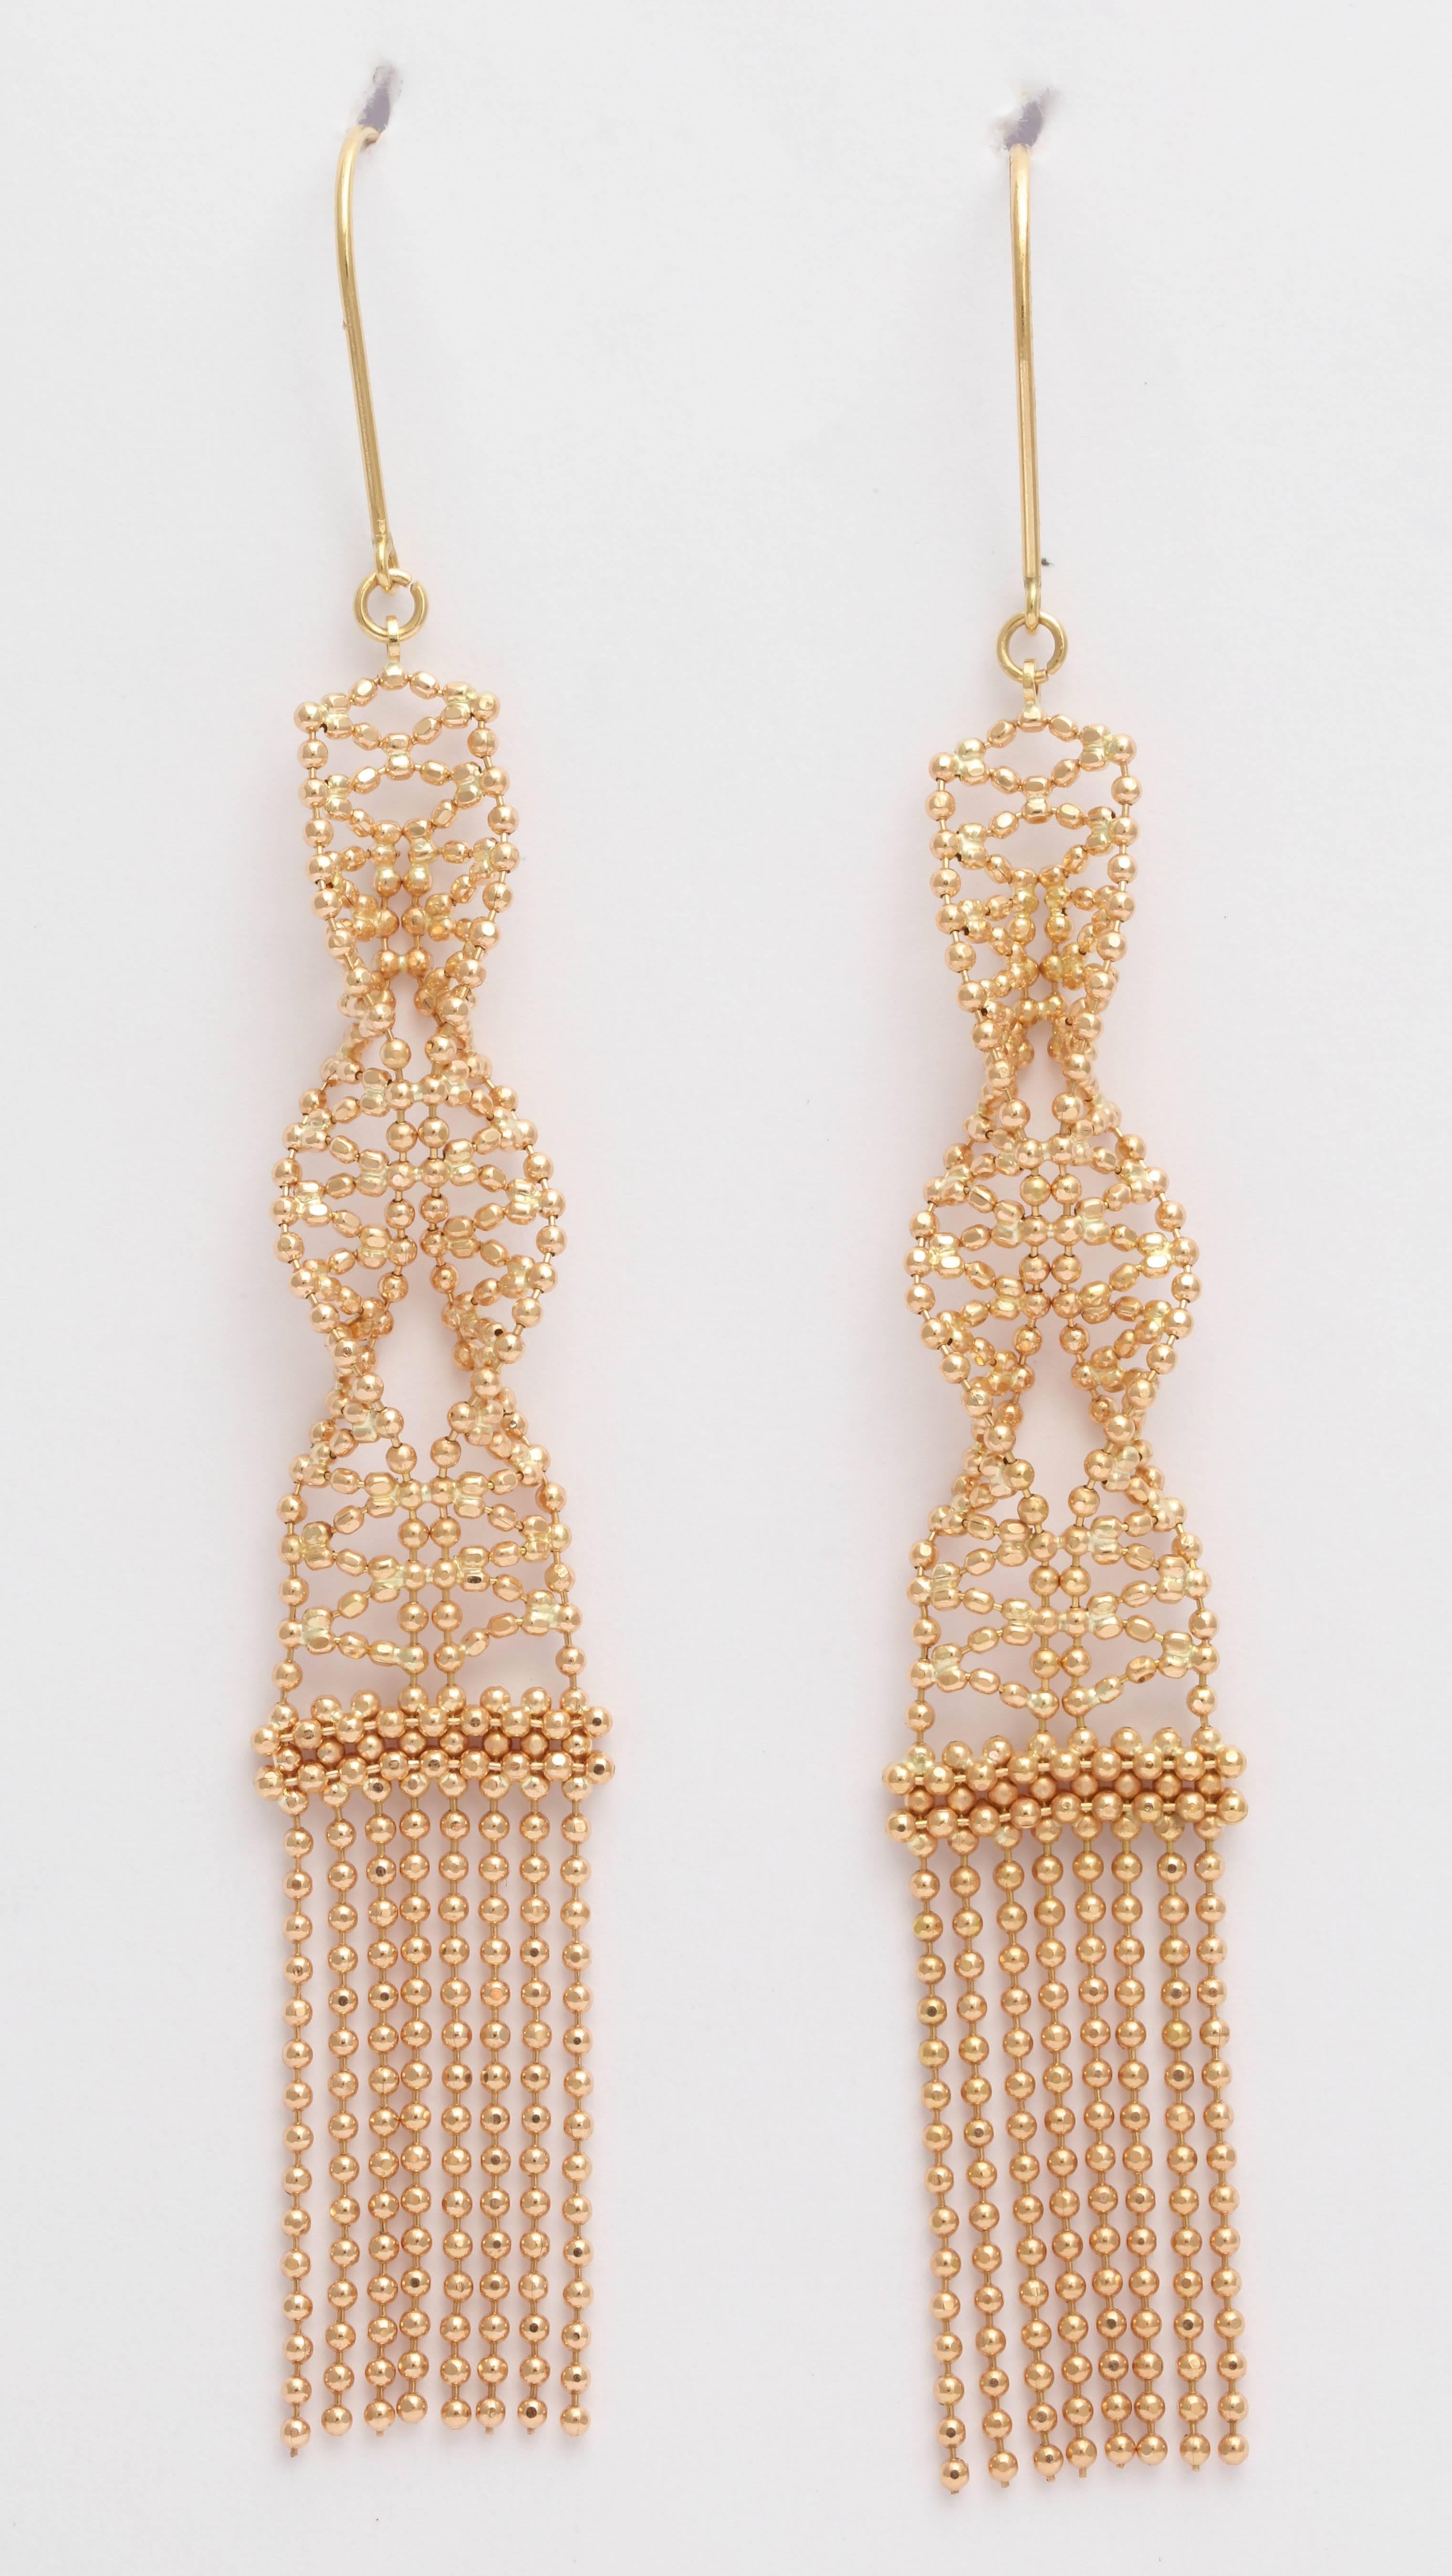 Women's Delicate Two Color Gold Ball Chain Earrings. For Sale